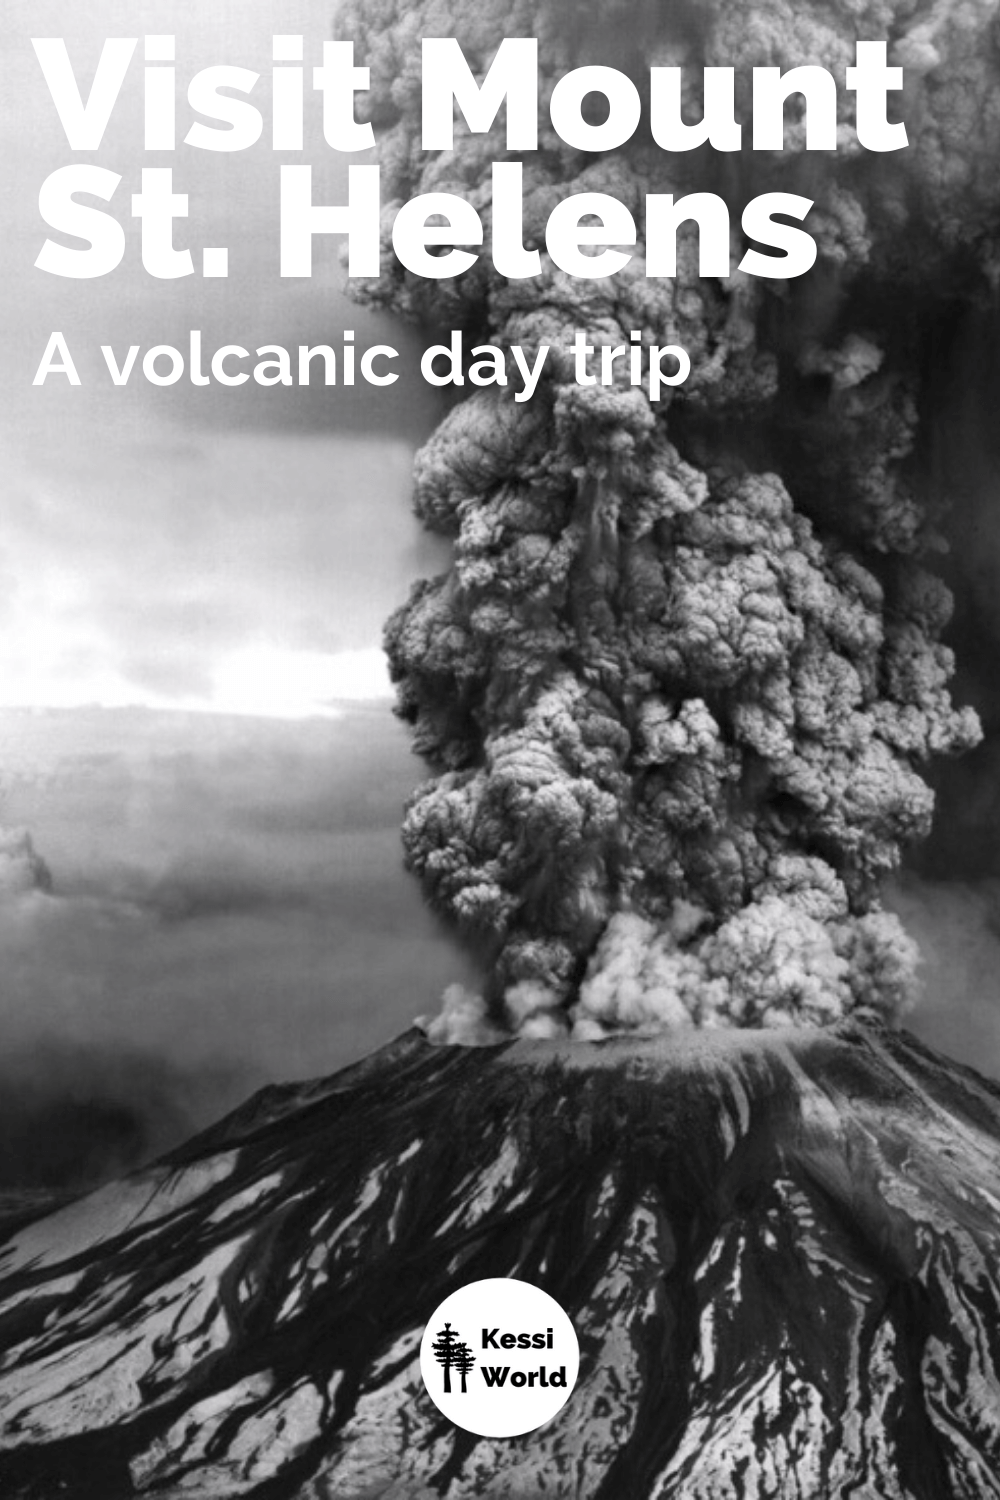 This Pinterest tile shows a black and white photo of the huge steam and ash blast that occurred the morning of May 18, 1980. Ash billows up to the sky from a rock and snow covered mountain capped by a huge crater.